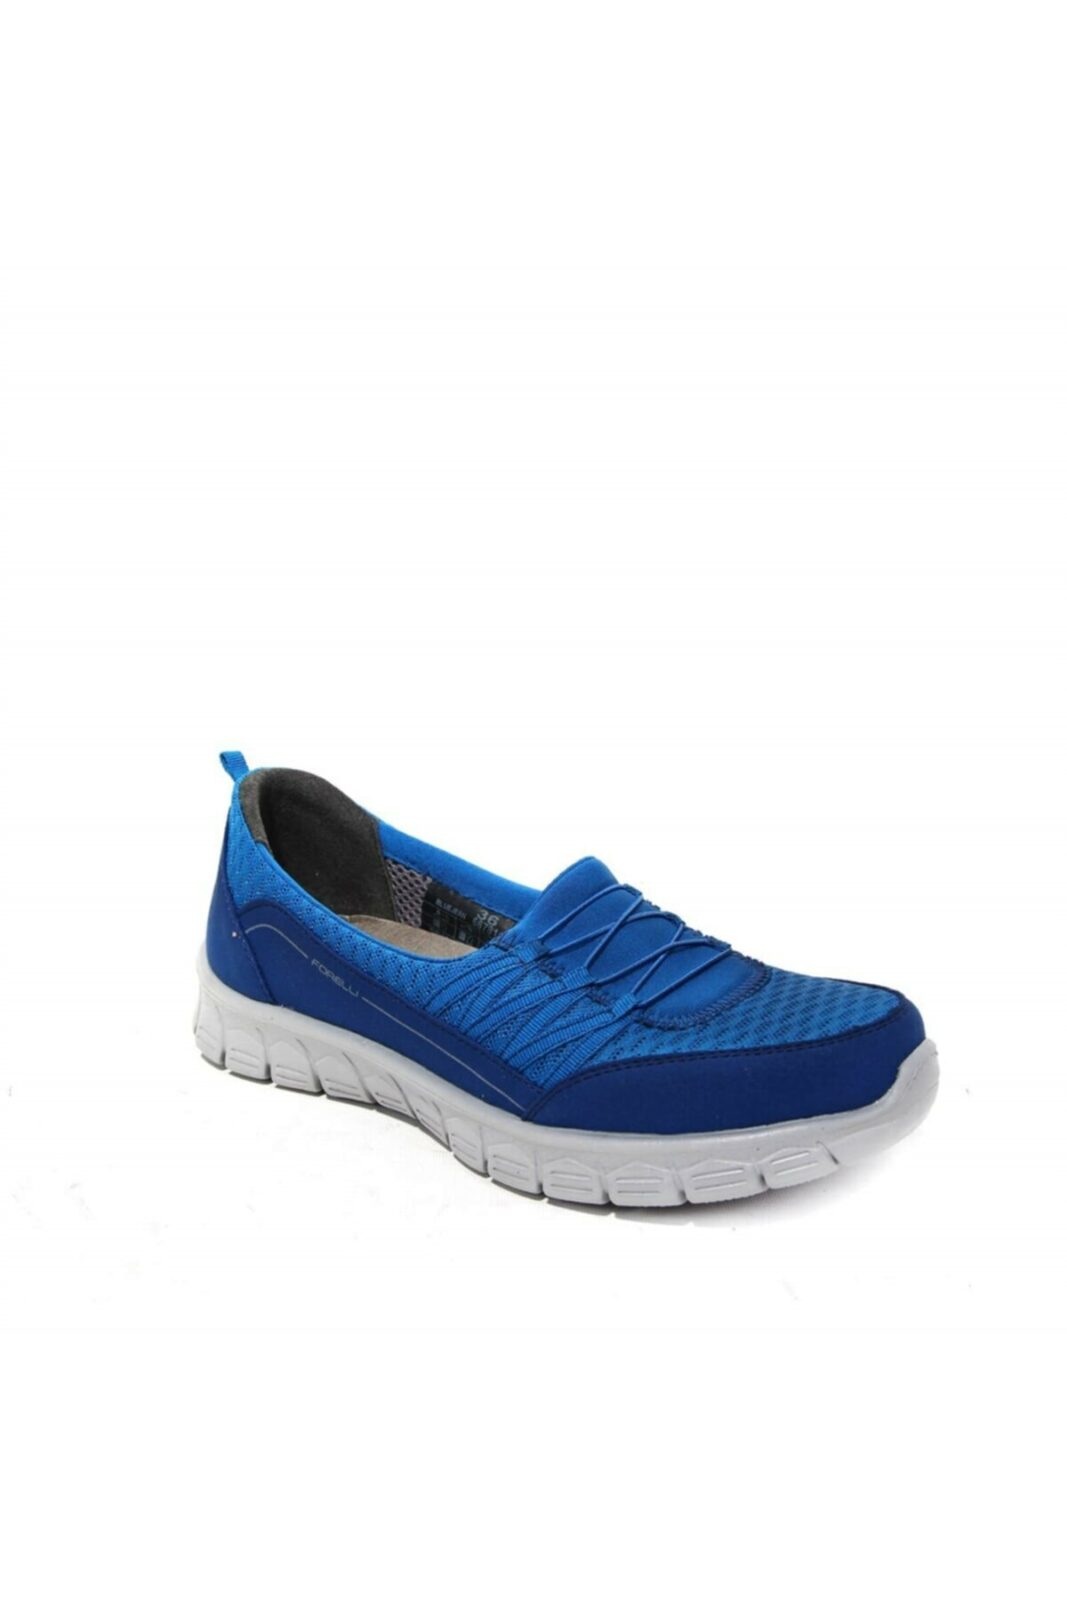 Forelli Walking Shoes - Blue